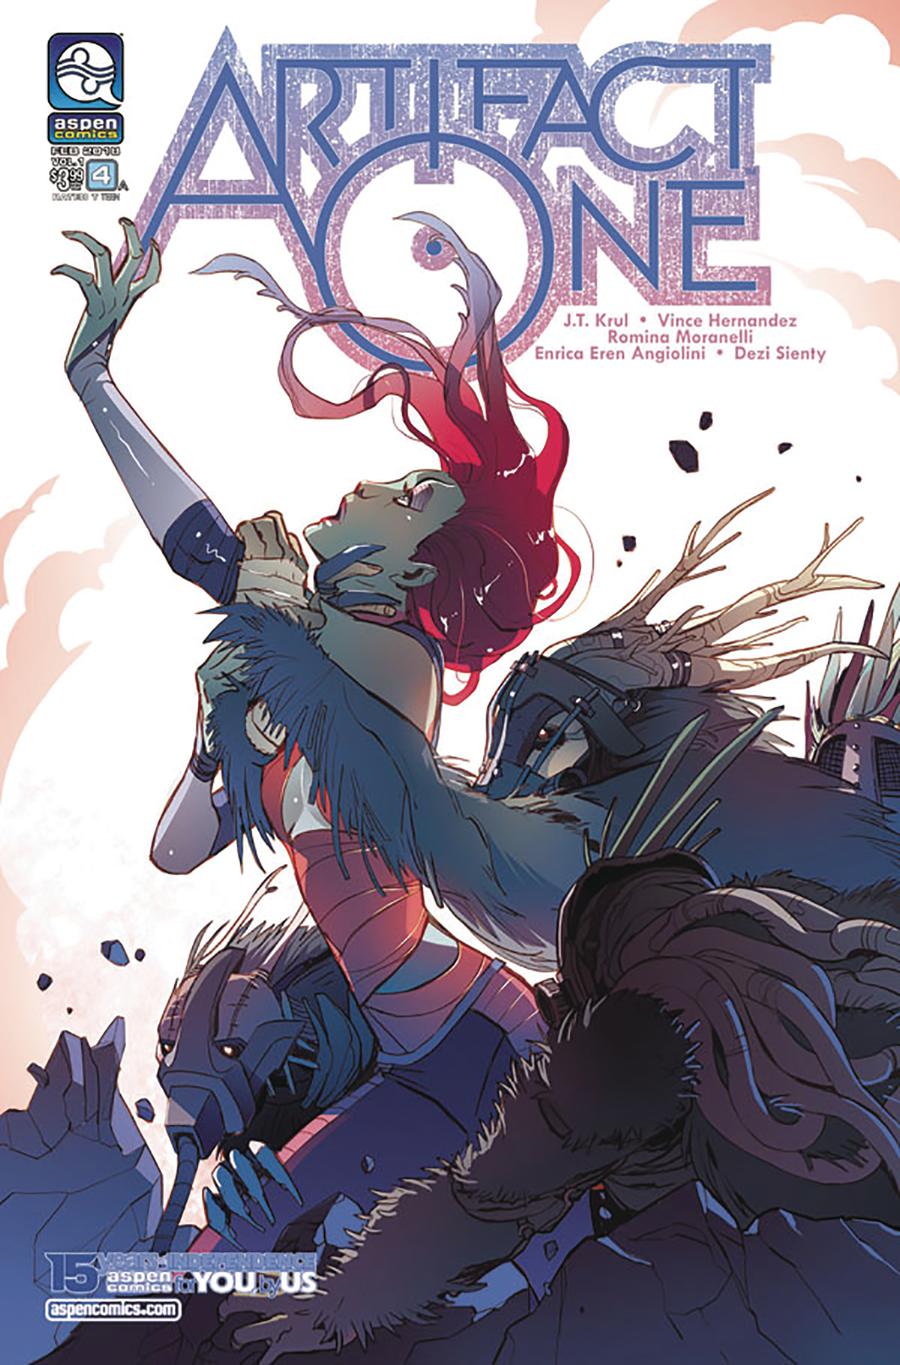 Artifact One #4 Cover A Regular Romina Moranelli Cover